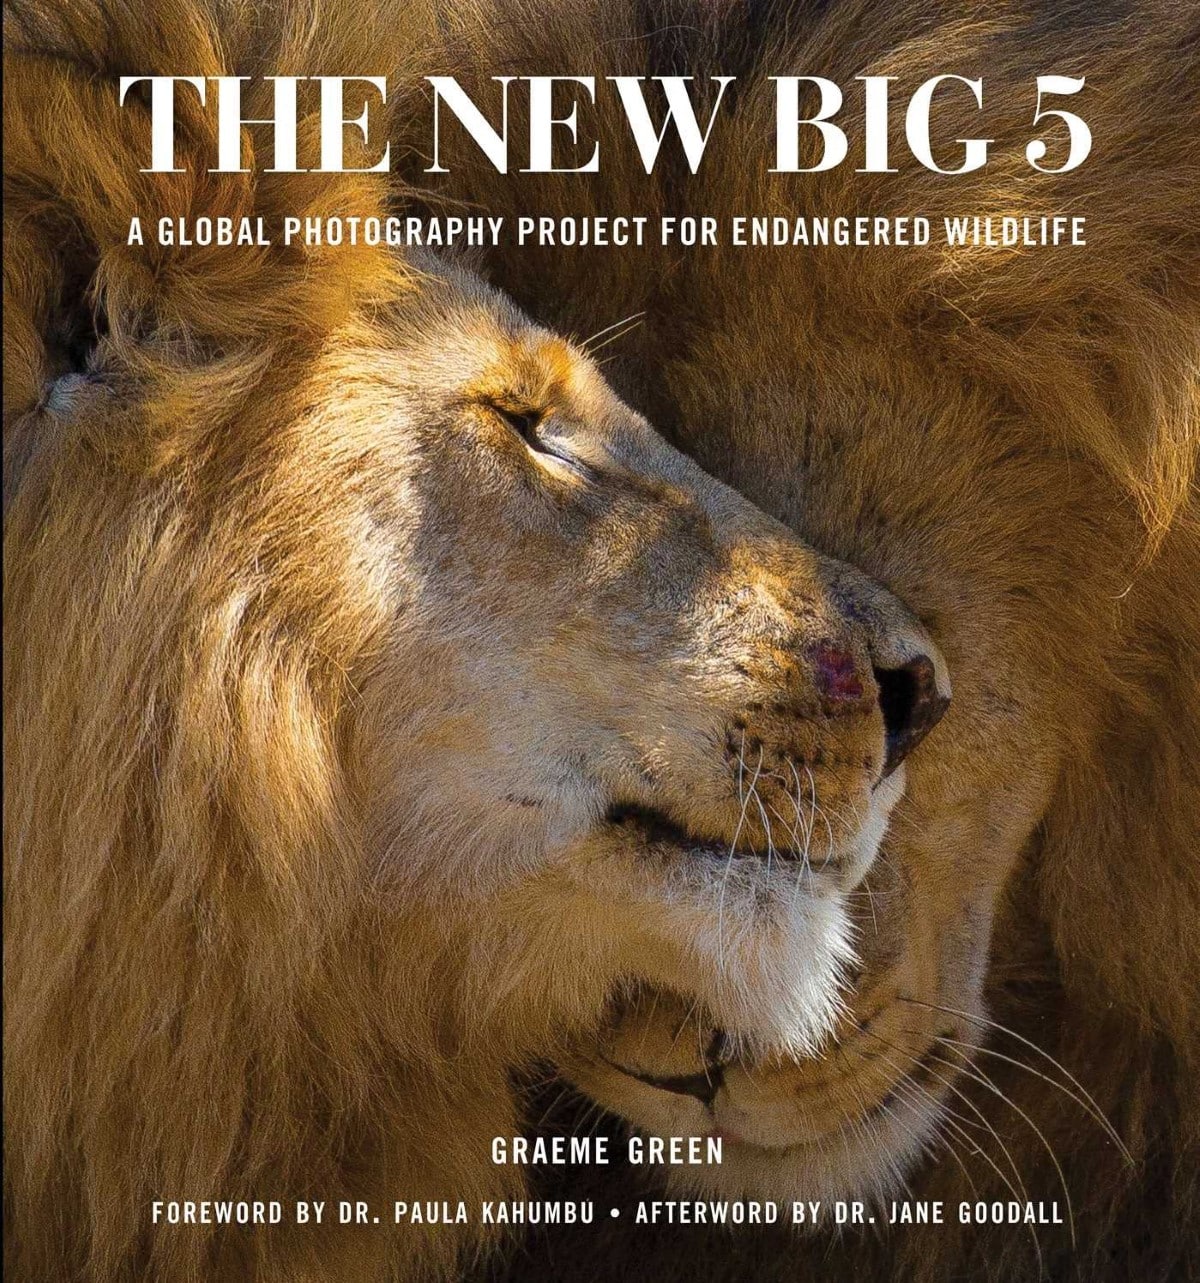 The New Big 5 by Graeme Green